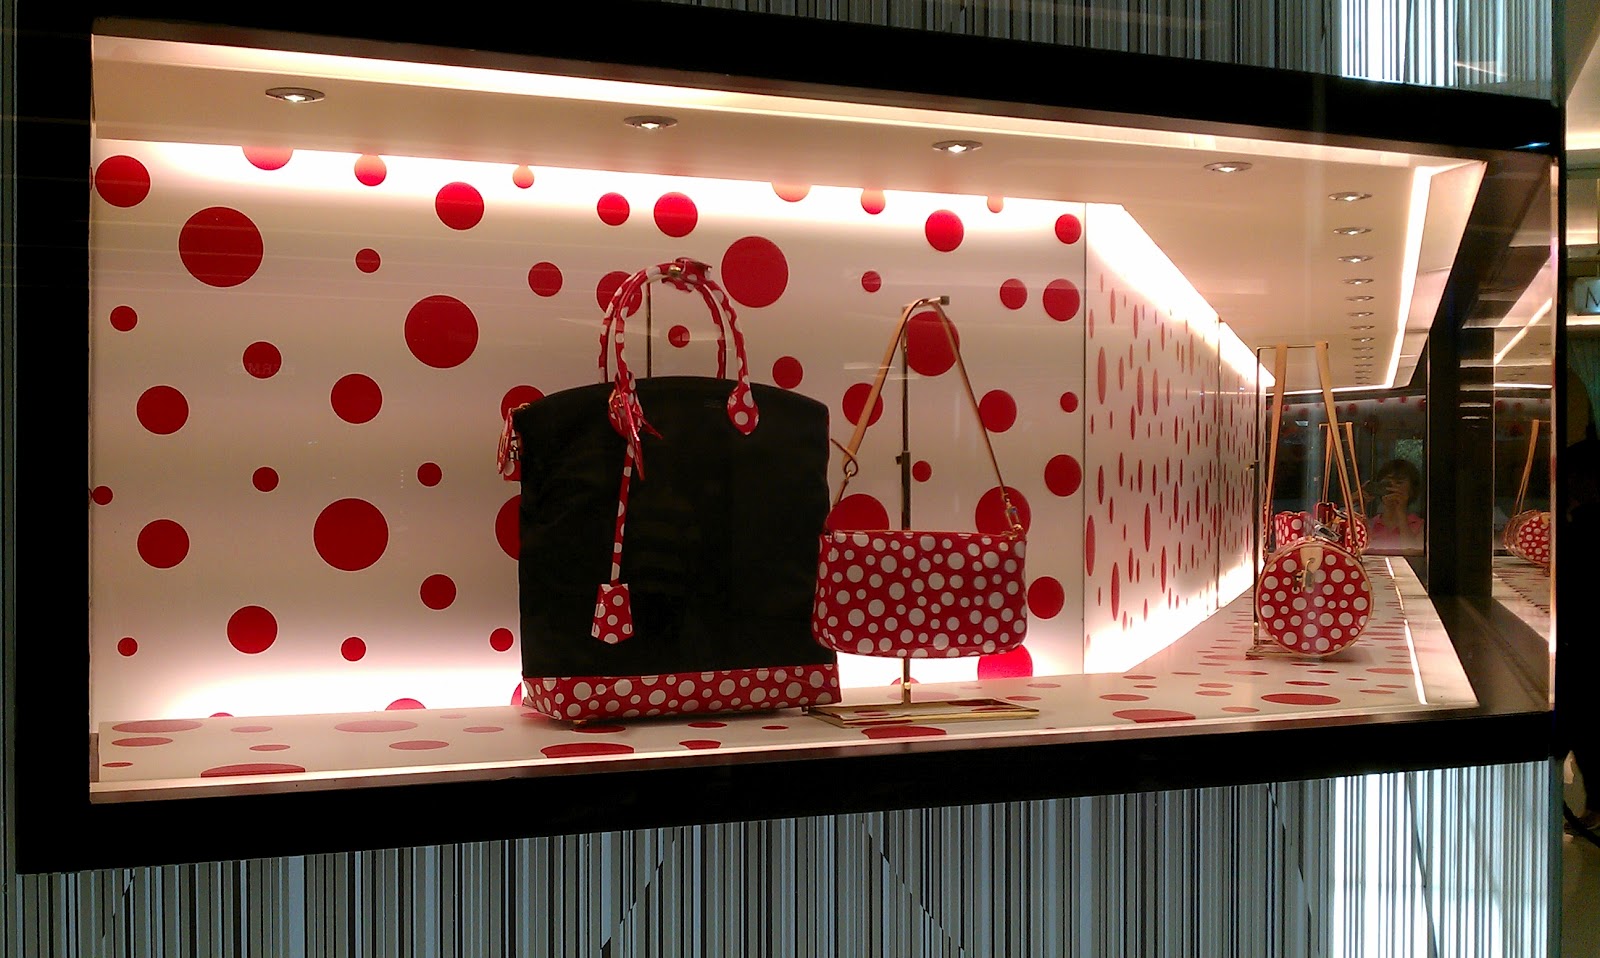 Louis Vuitton's window display in collaboration with Yayoi…